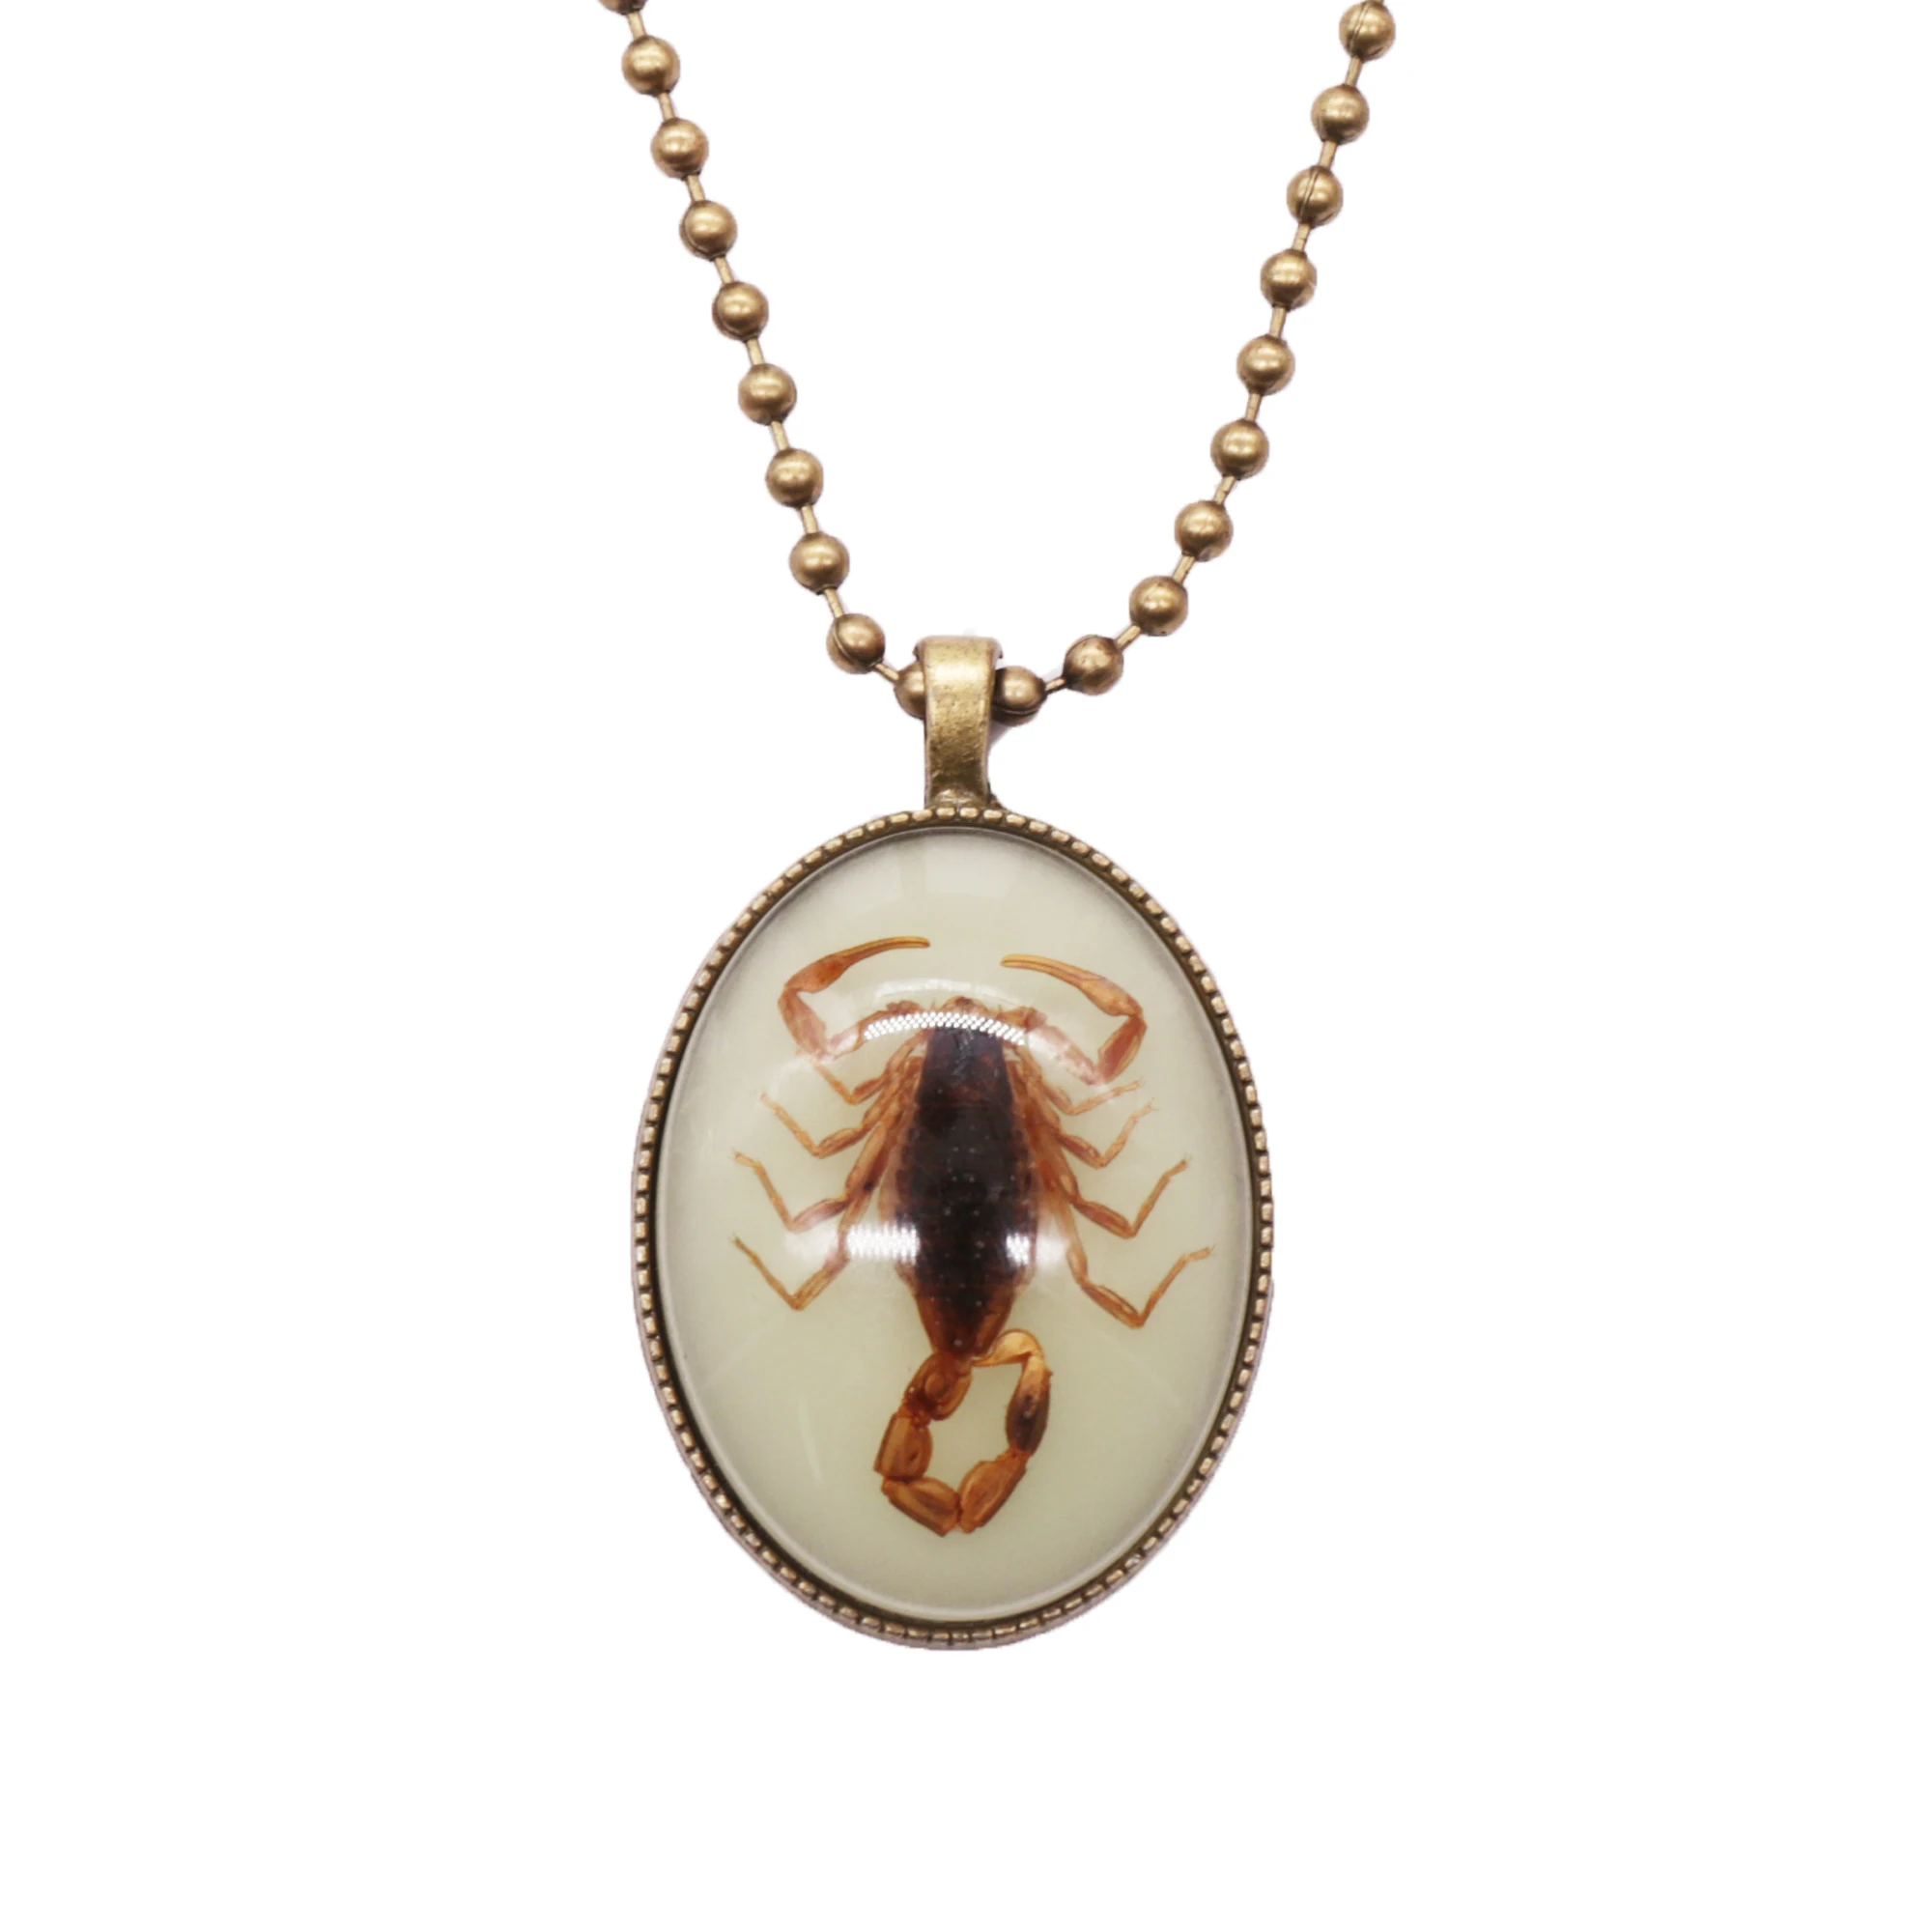 Real Gold Scorpion Pendant Necklace Gold Scorpion in Glow in the Dark Drop Resin 